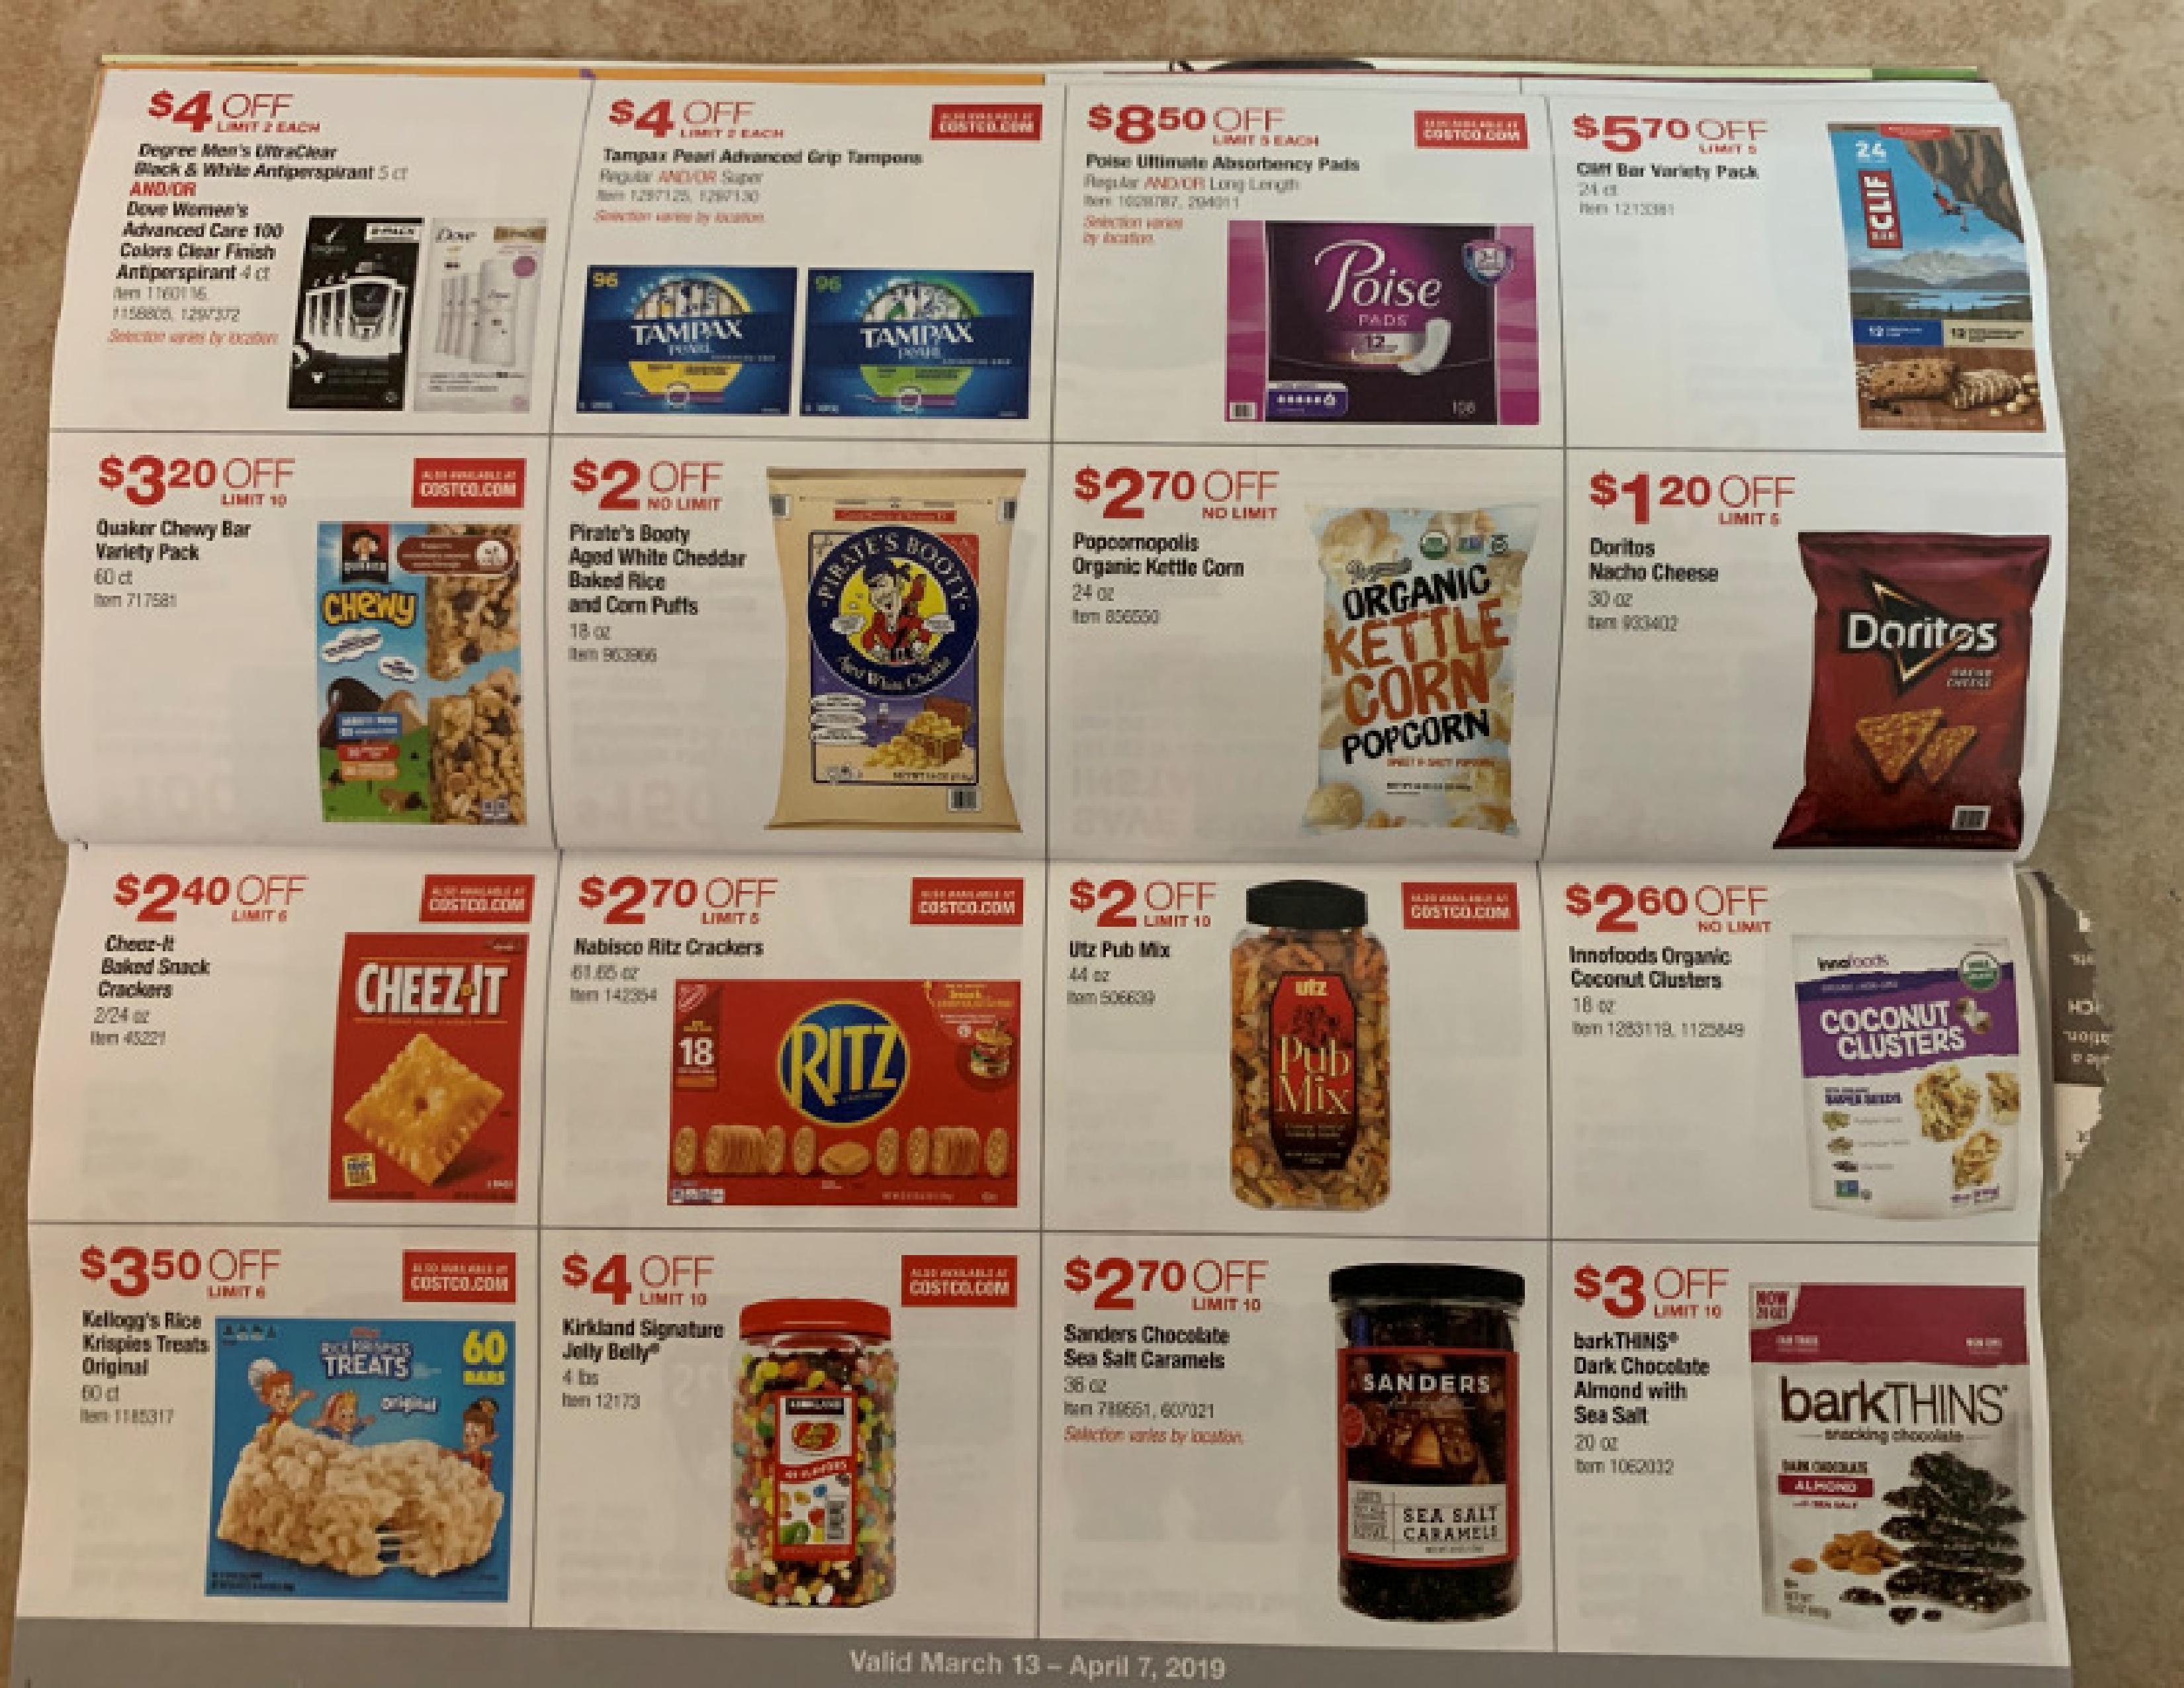 Costco March 2019 Coupon Book and Best Deals of the Month